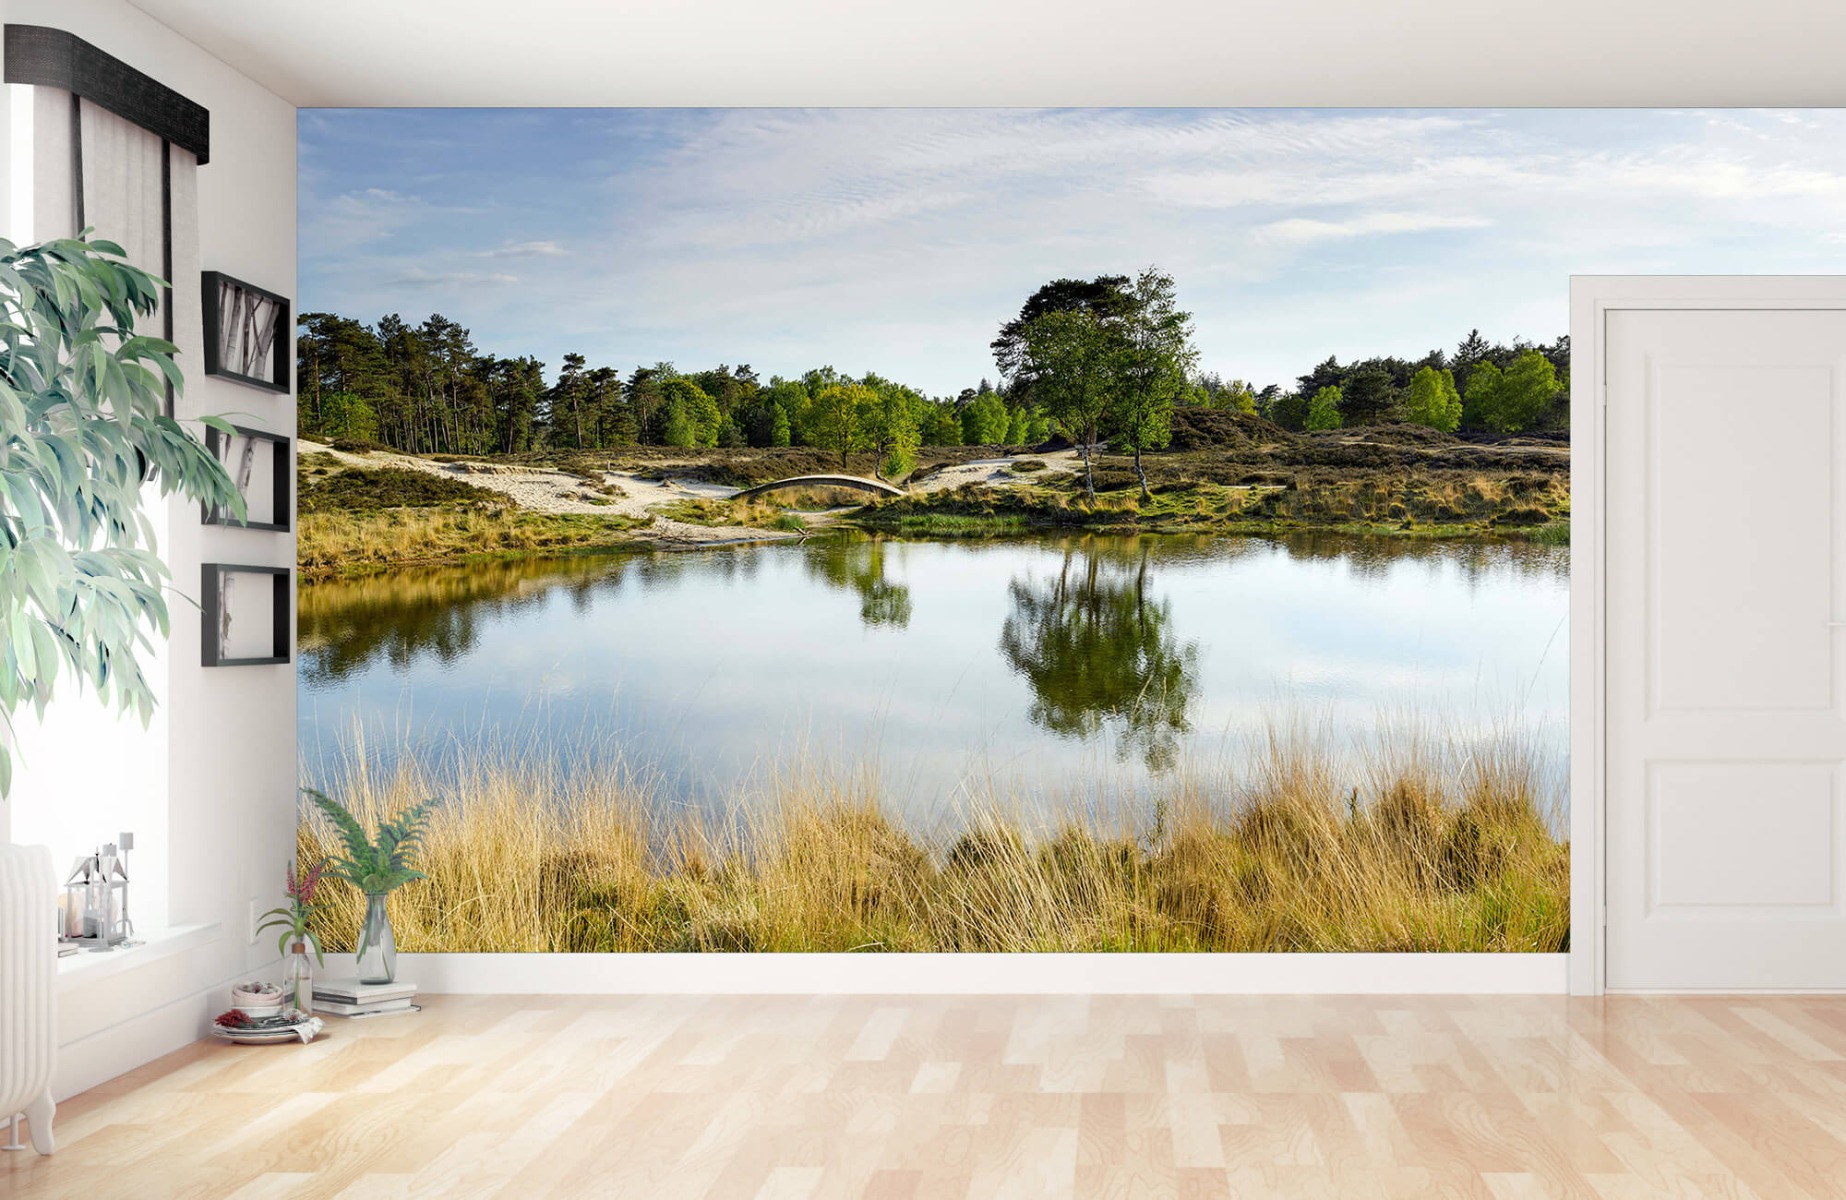 Landscape wallpaper - A small forest lake in the heathland area  - Bedroom 13